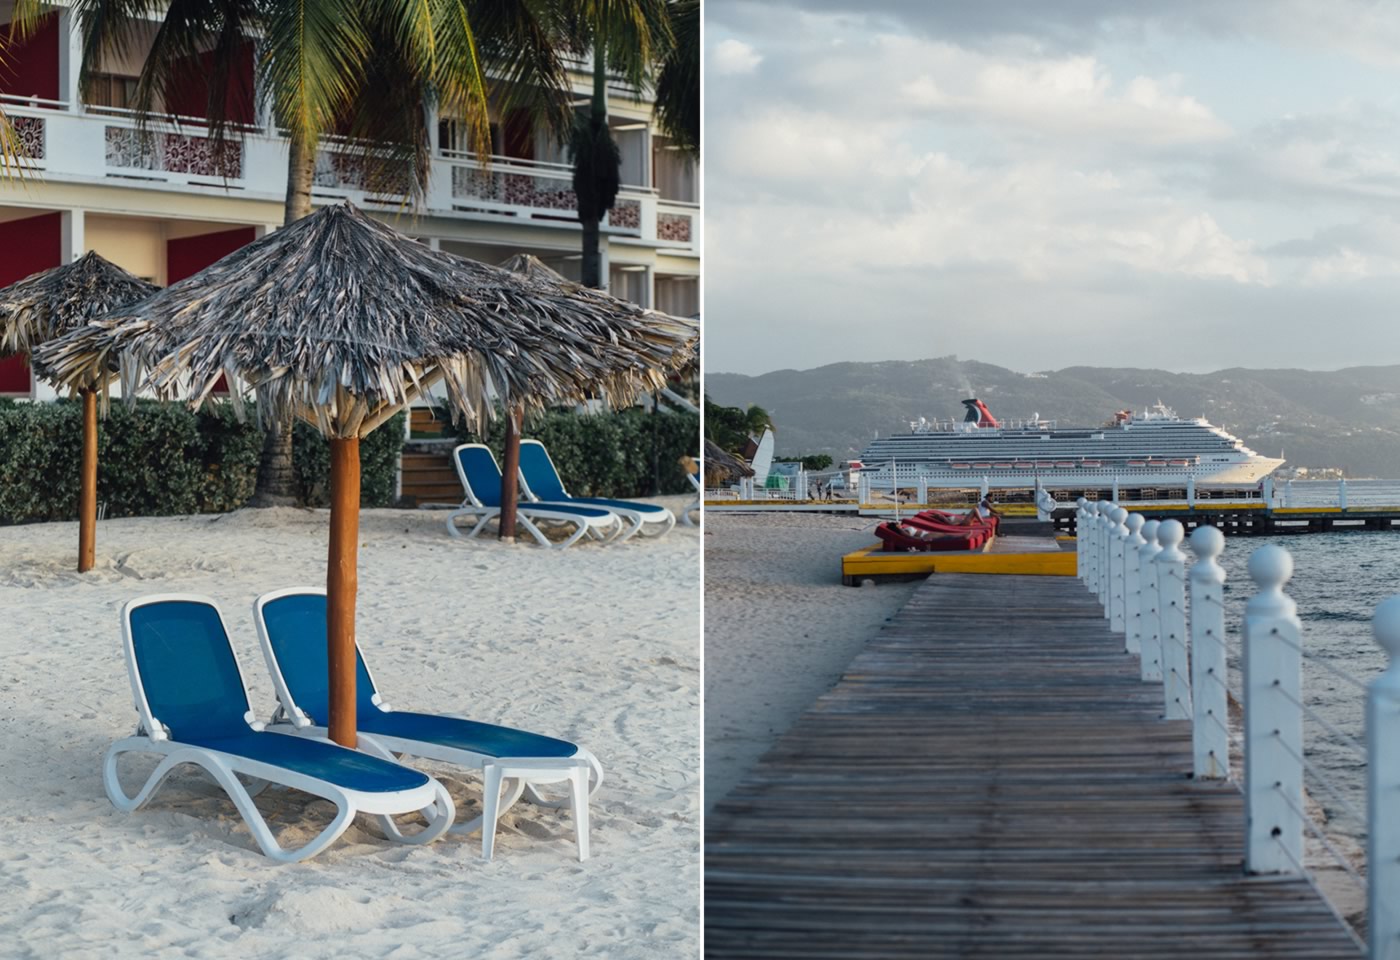 Royal Decameron Montego Bay and a Cruise Liner